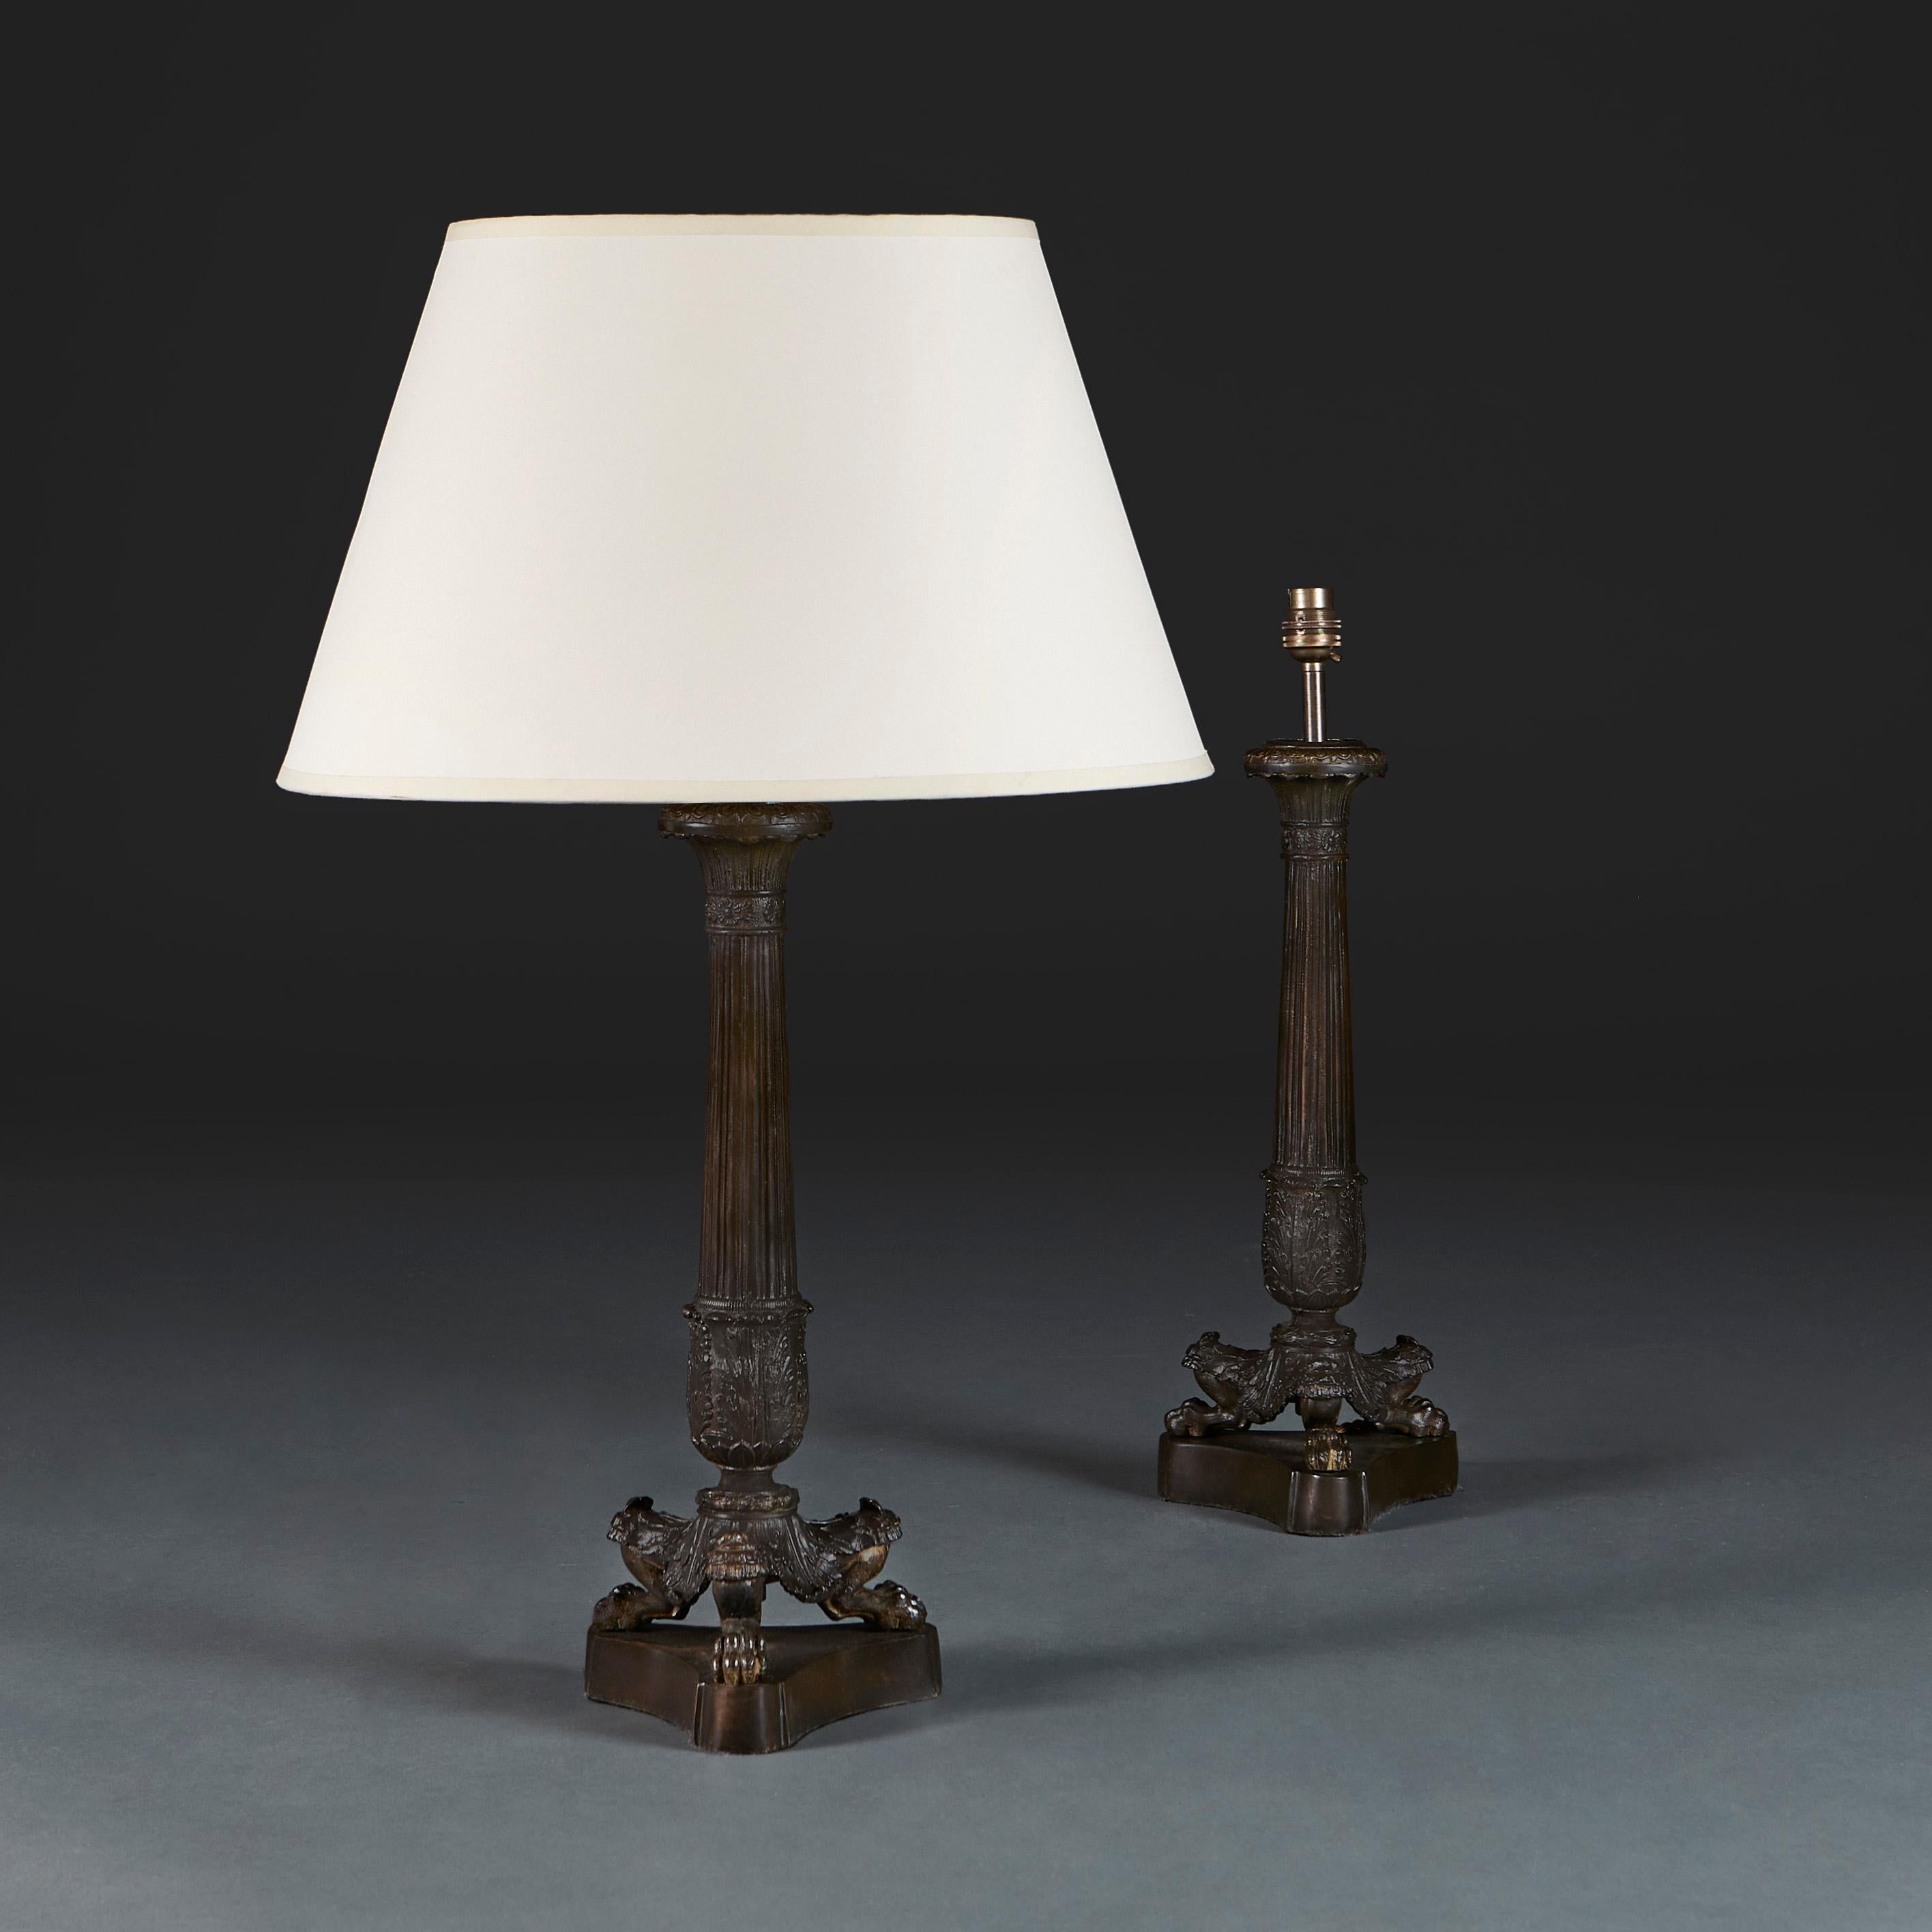 England, circa 1890

A pair of late nineteenth century bronze column lamps, with fluted uprights supported on tripod plinth base, with hairy paw feet.

Height of column 41.00cm
Height with shade 66.00cm
Width of base 16.00cm.

Please note: This is